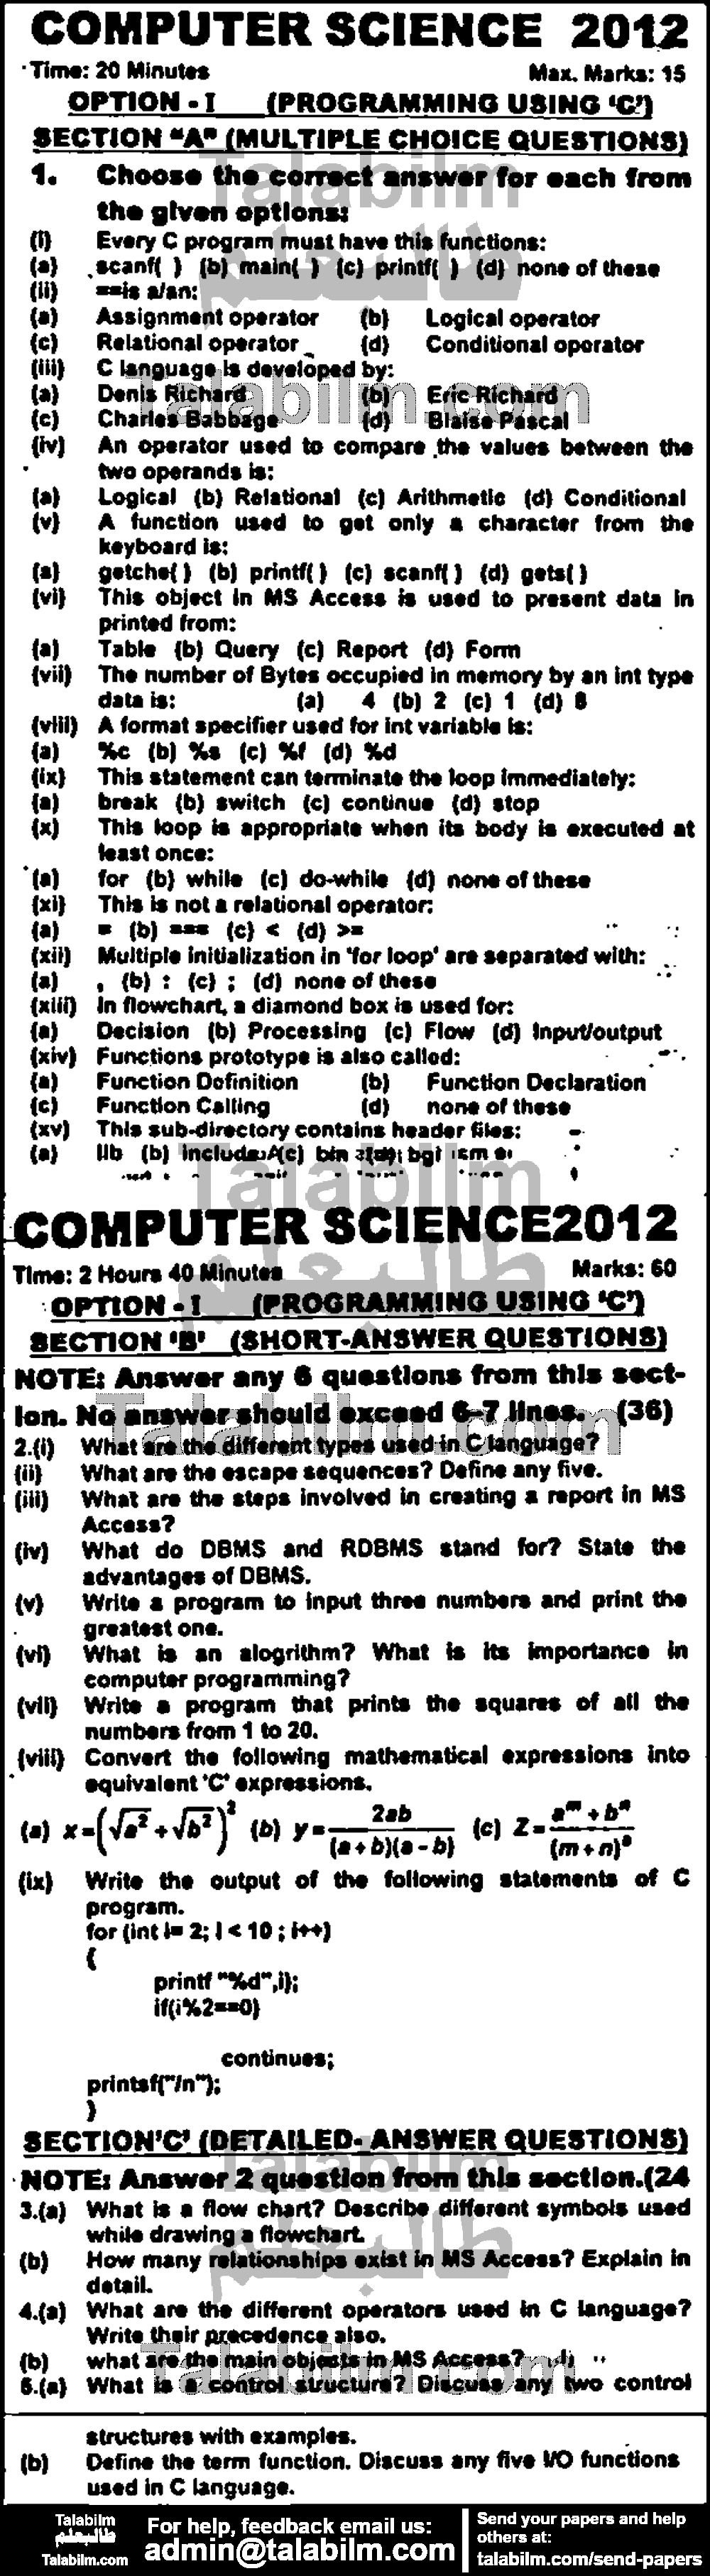 Computer Science 0 past paper for Group-I 2012